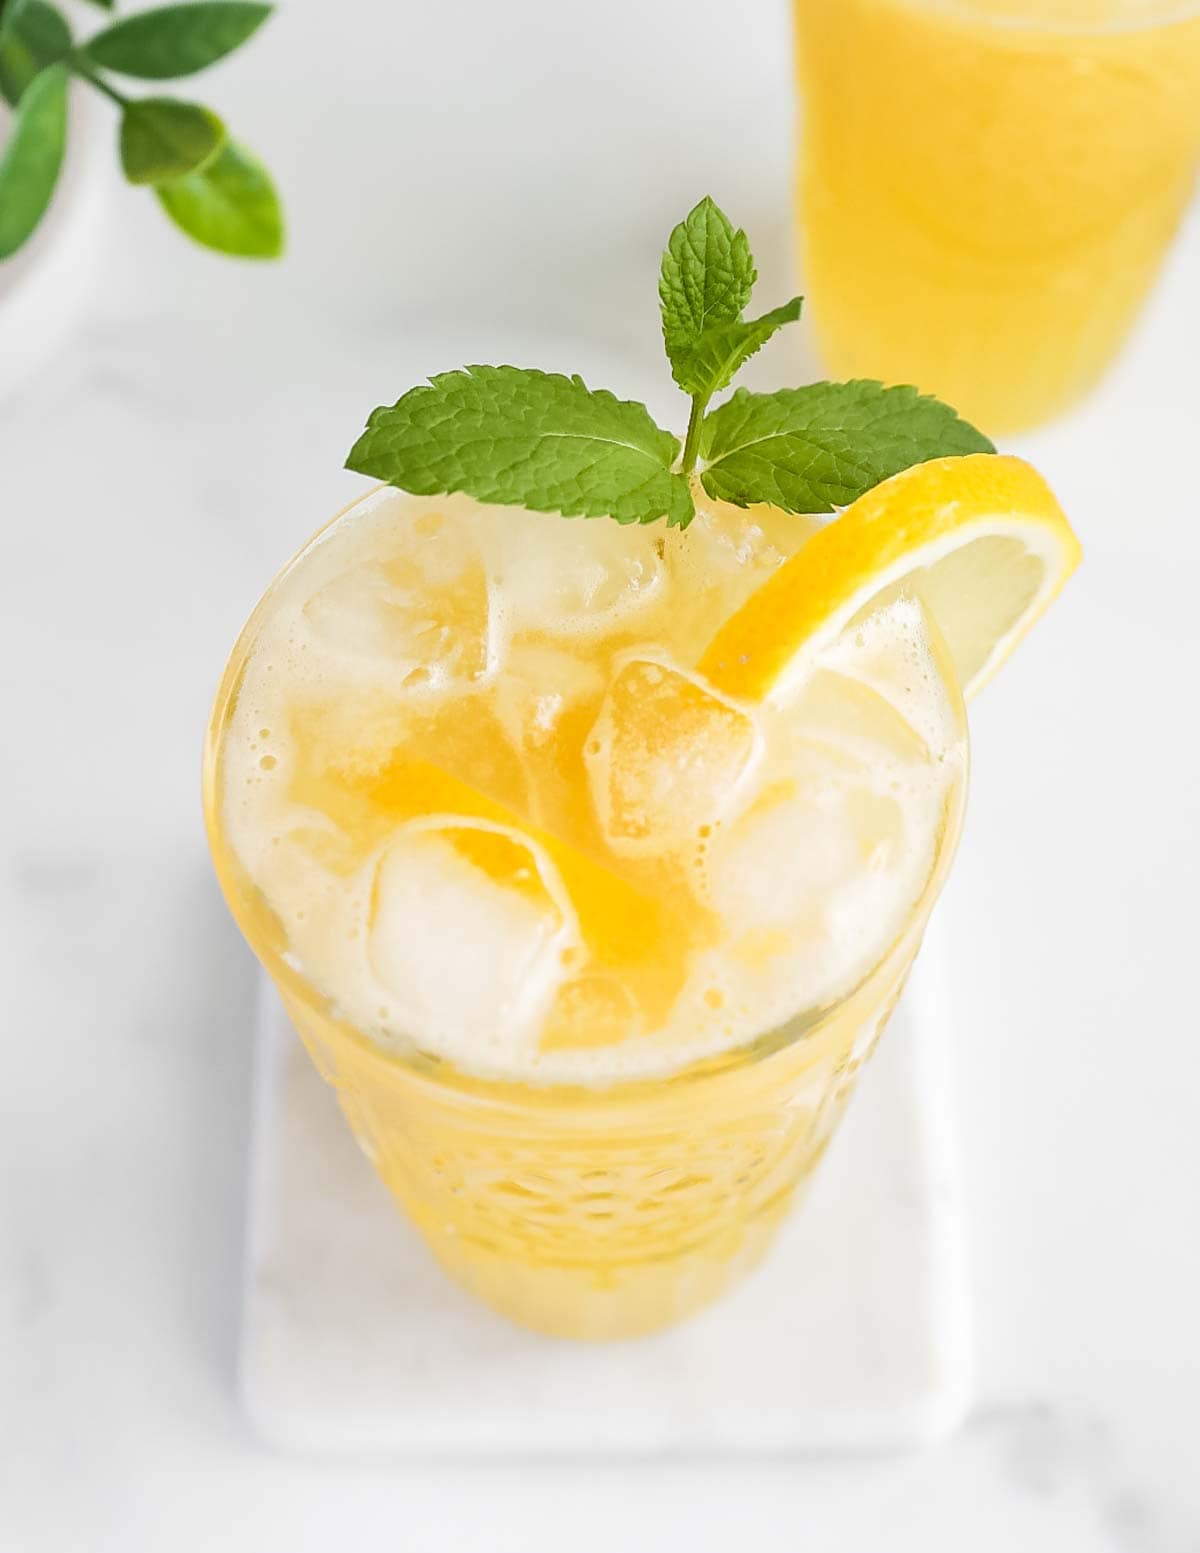 An overhead picture of a glass filled with yellow lemonade, ice, and a sprig of mint with a lemon slice on the edge